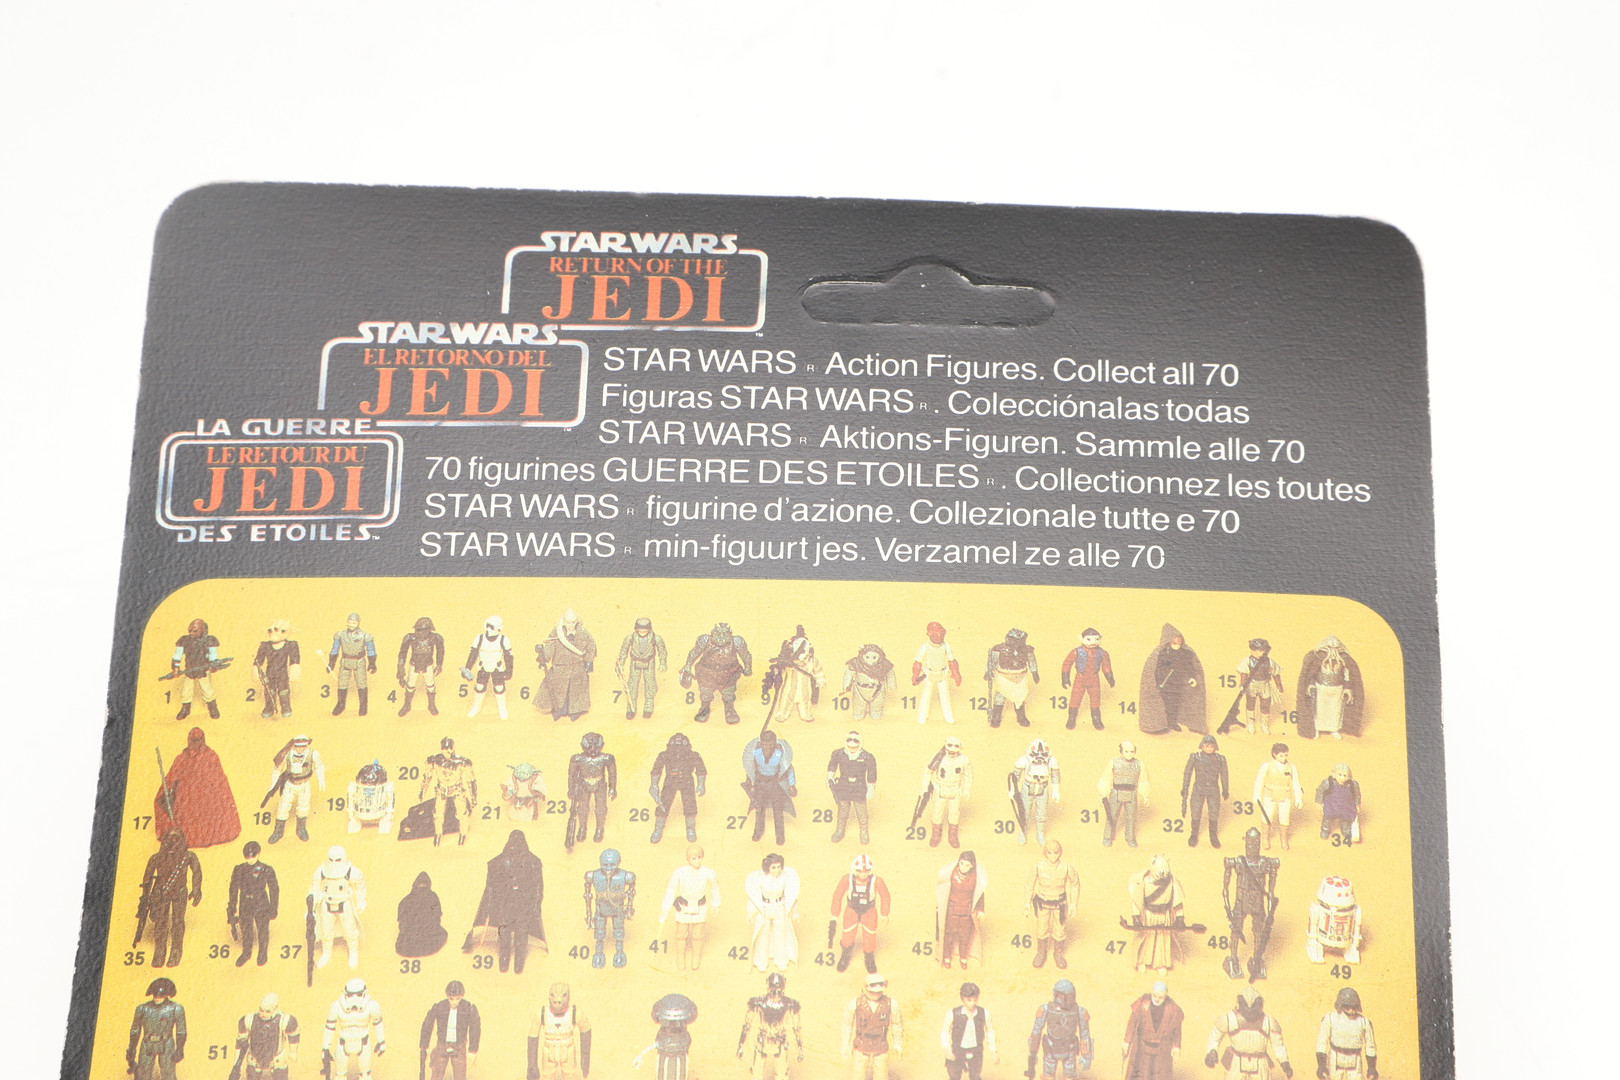 STAR WARS CARDED FIGURES BY PALITOY - HAN SOLO & PRINCESS LEIA. - Image 10 of 18